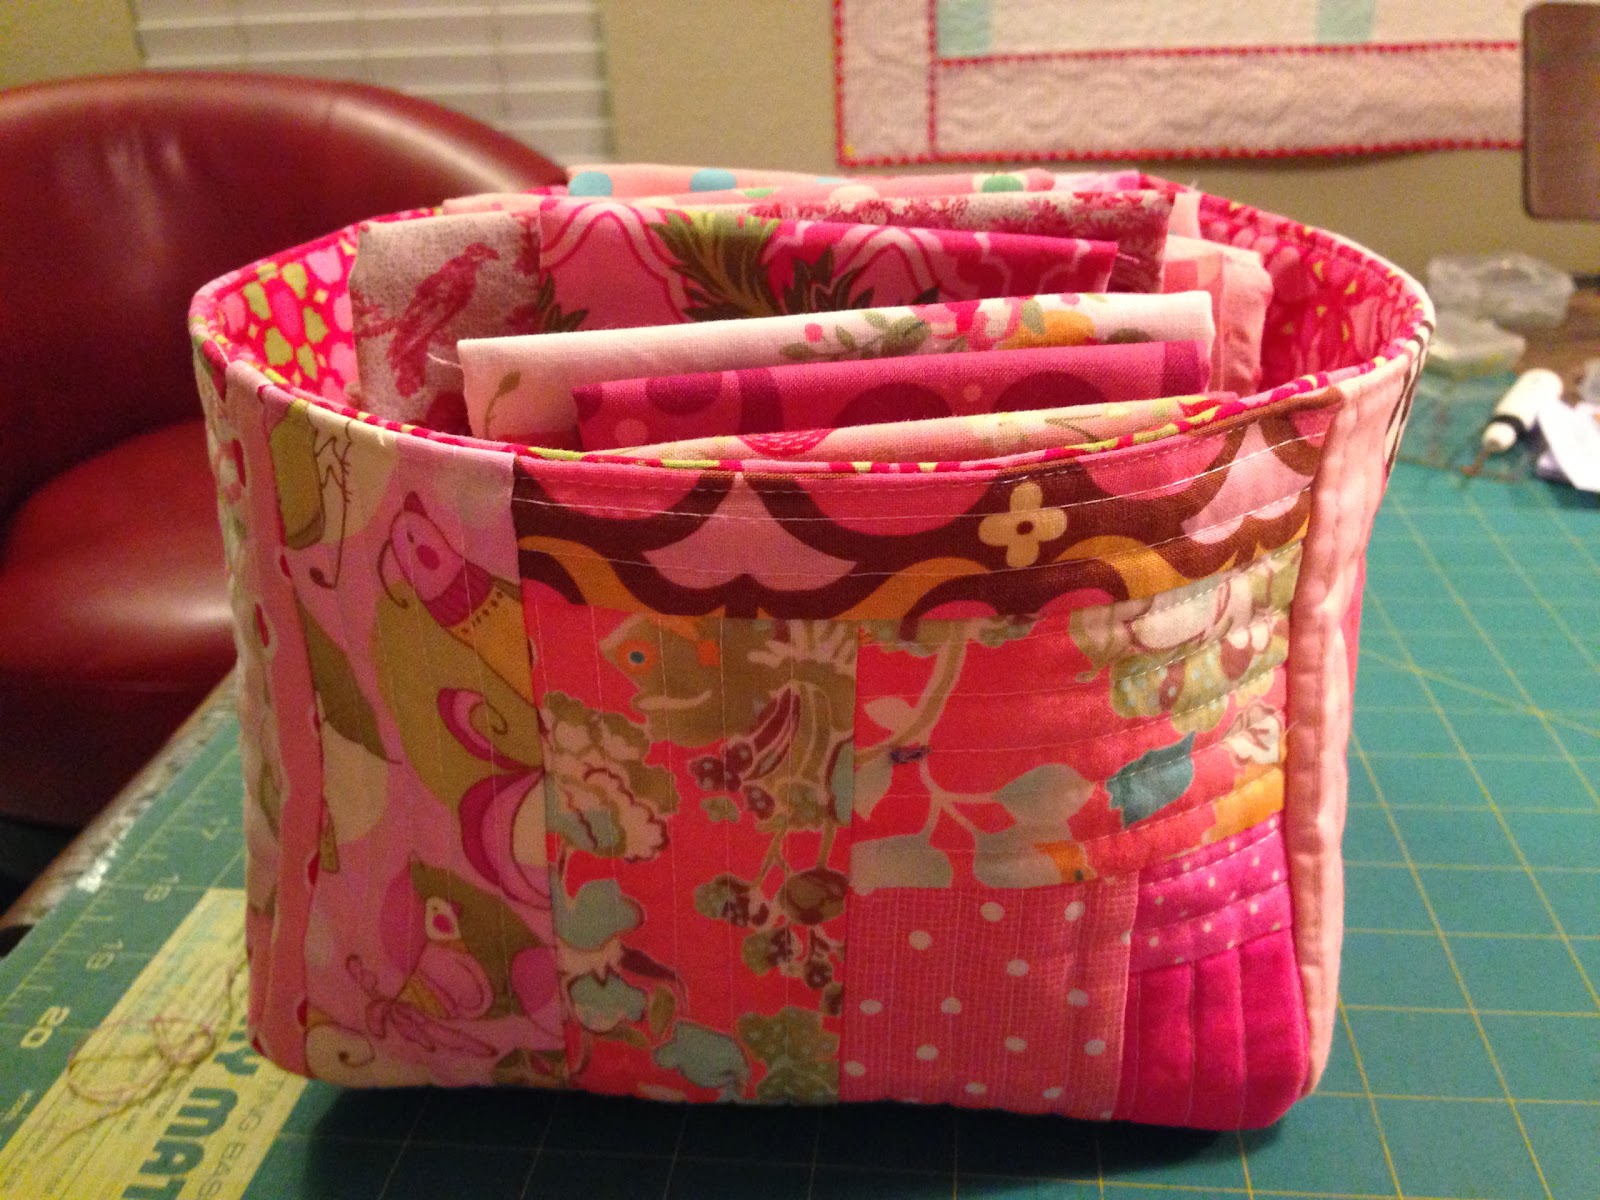 dream quilt create: Lined Fabric Basket Tutorial